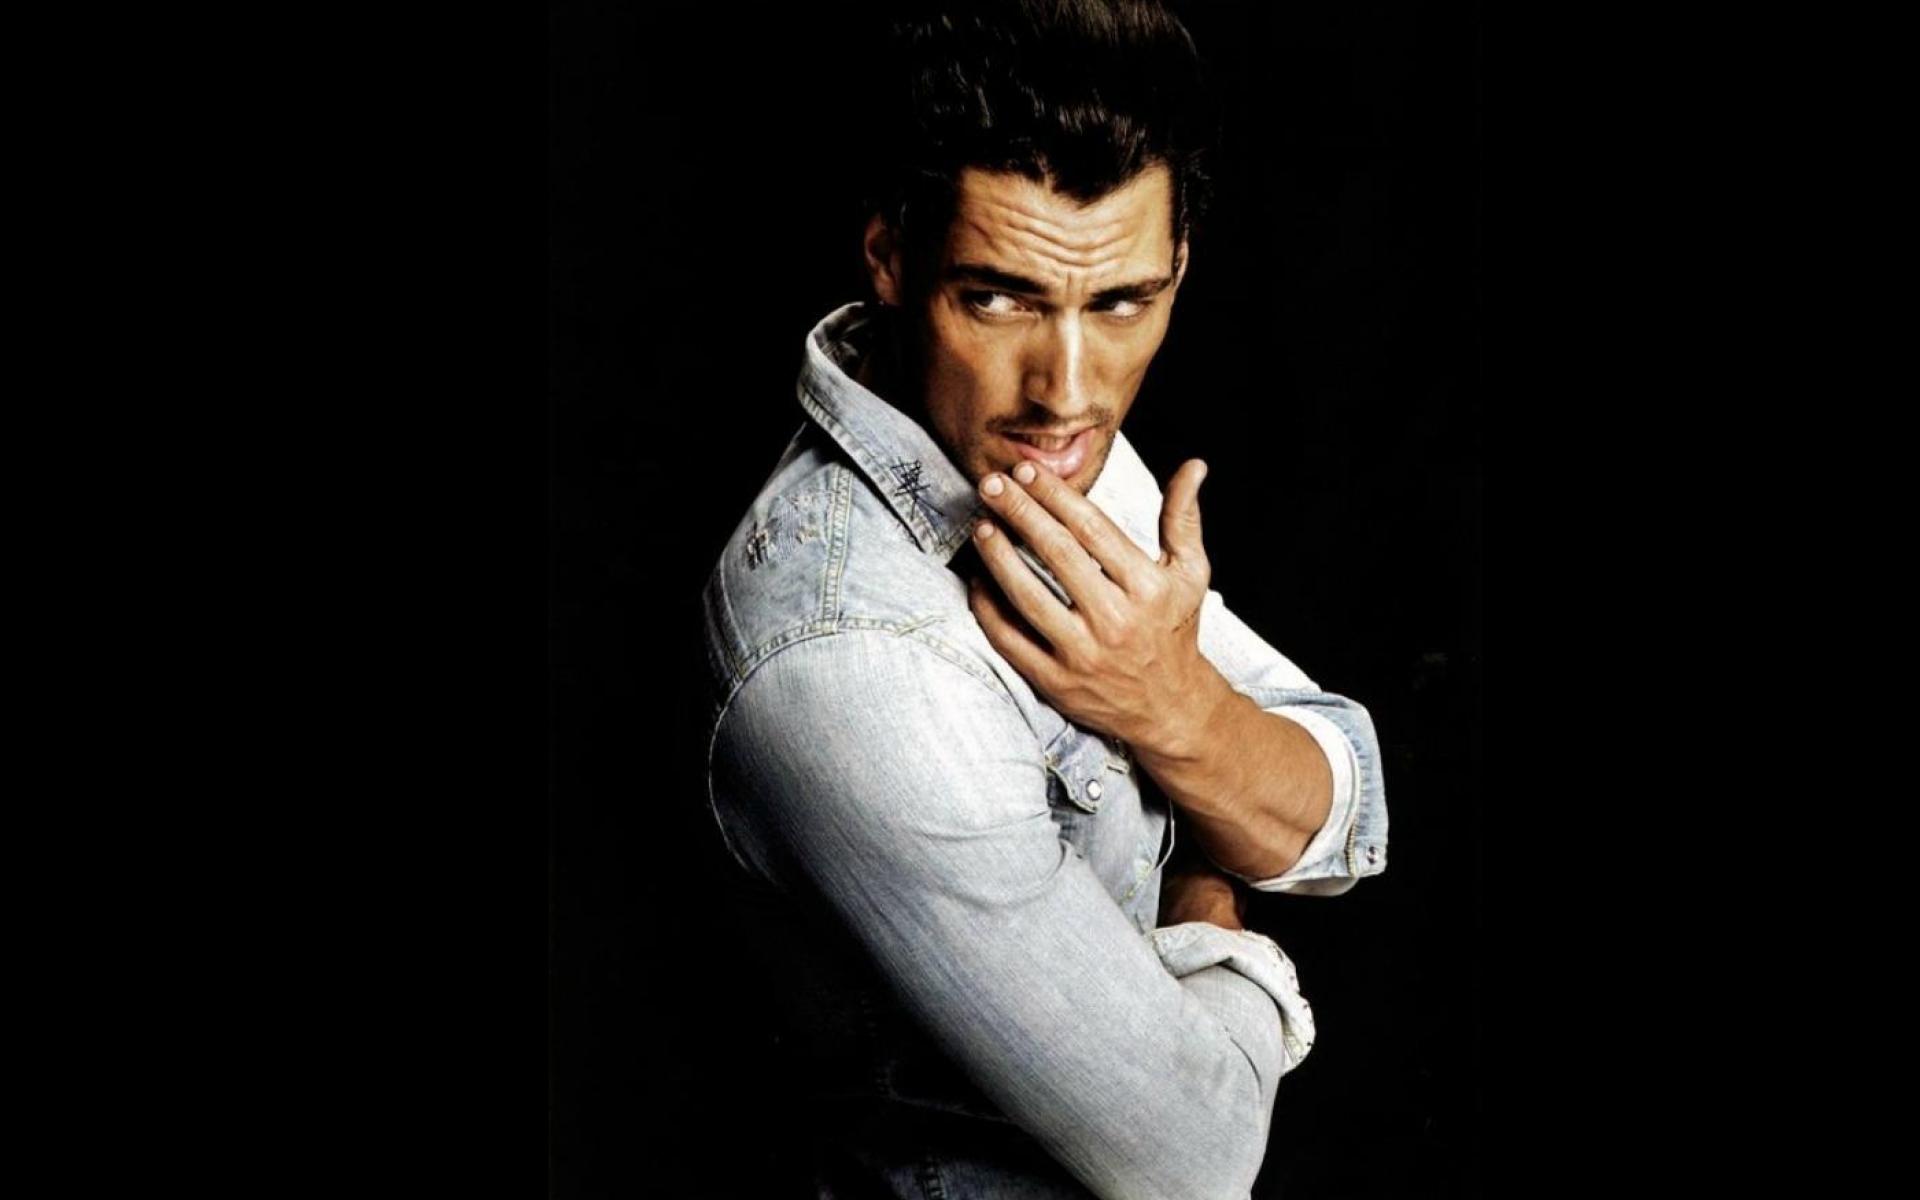 David Gandy High Quality And Resolution Wallpaper On